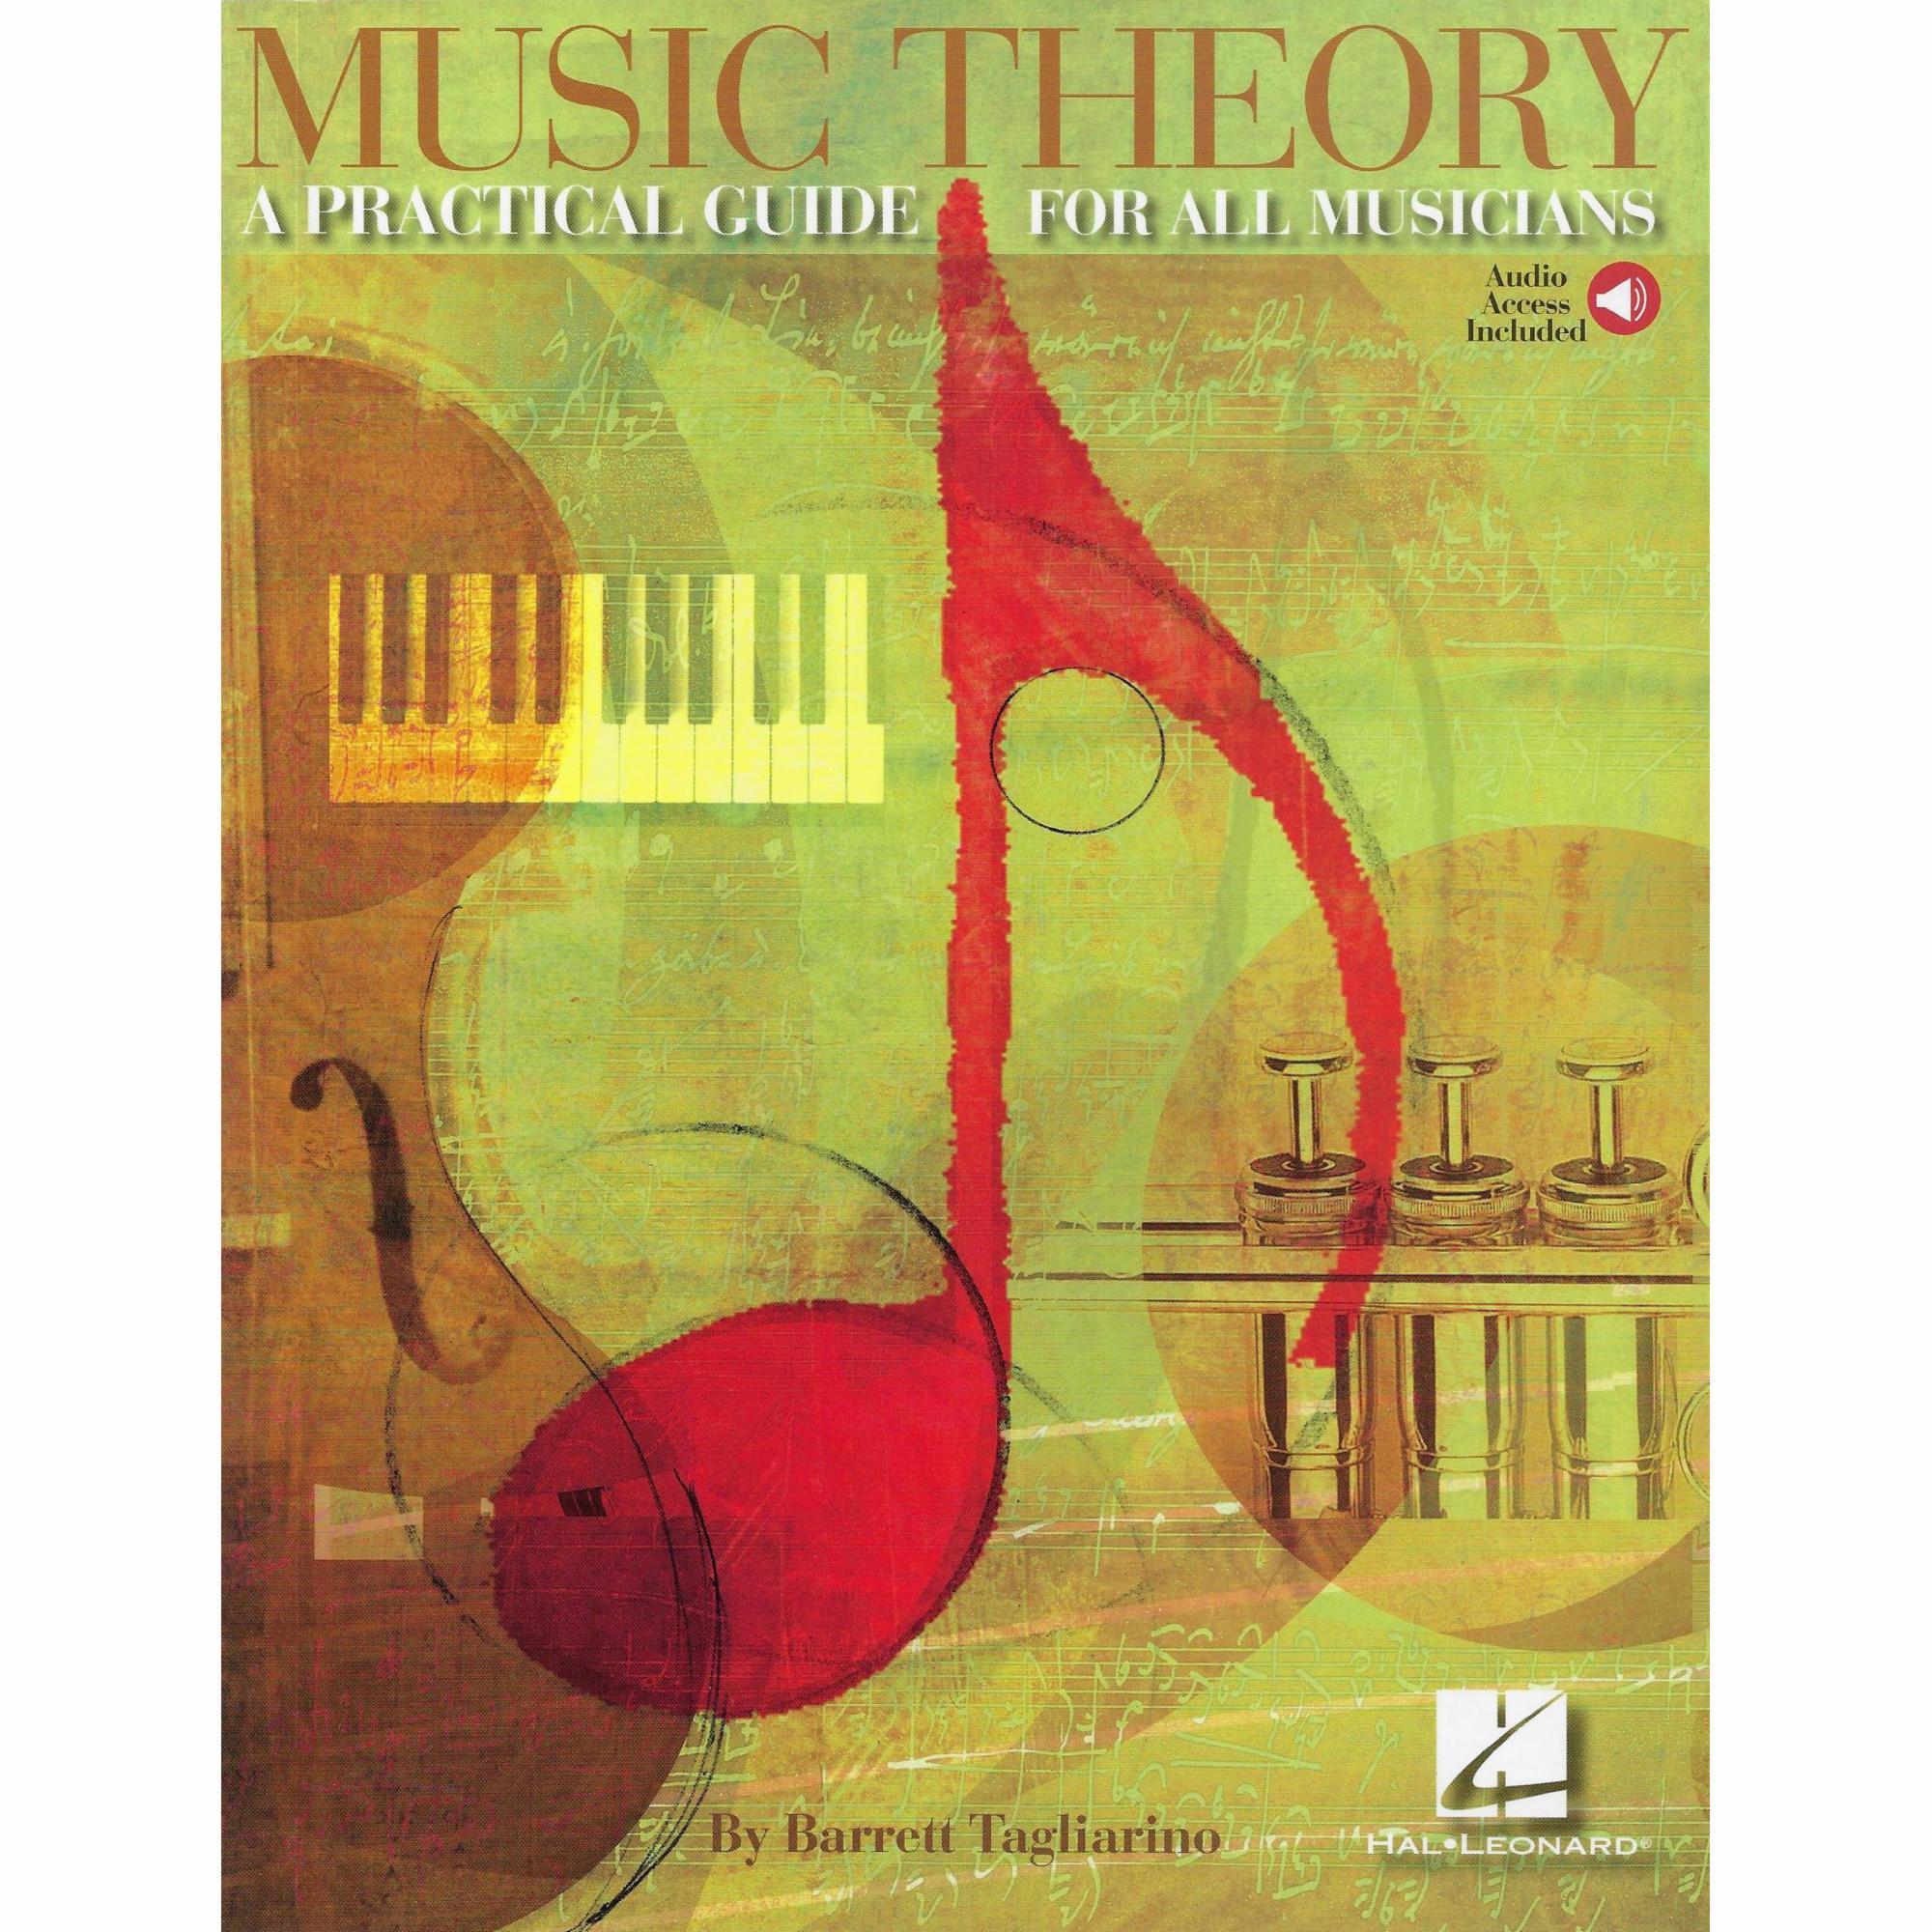 Music Theory: A Practical Guide for All Musicians